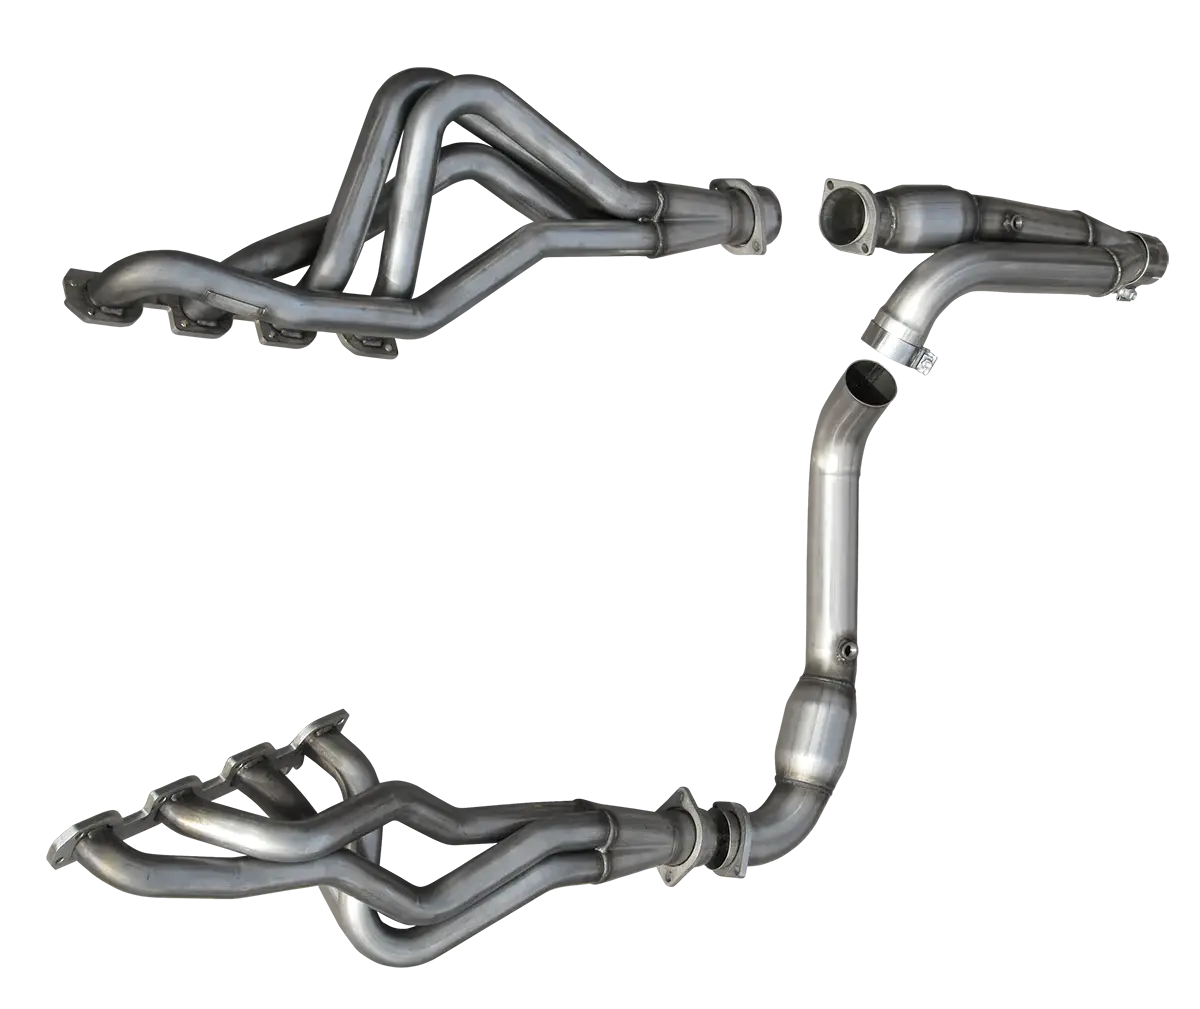 American Racing Headers - ARH Dodge Ram 1500 2006-2008 1-3/4" x 3" Long Tube Headers & Full Non Catted Connection Pipes With Stainless Steel Exhaust Tips (Square-Port) - Image 1